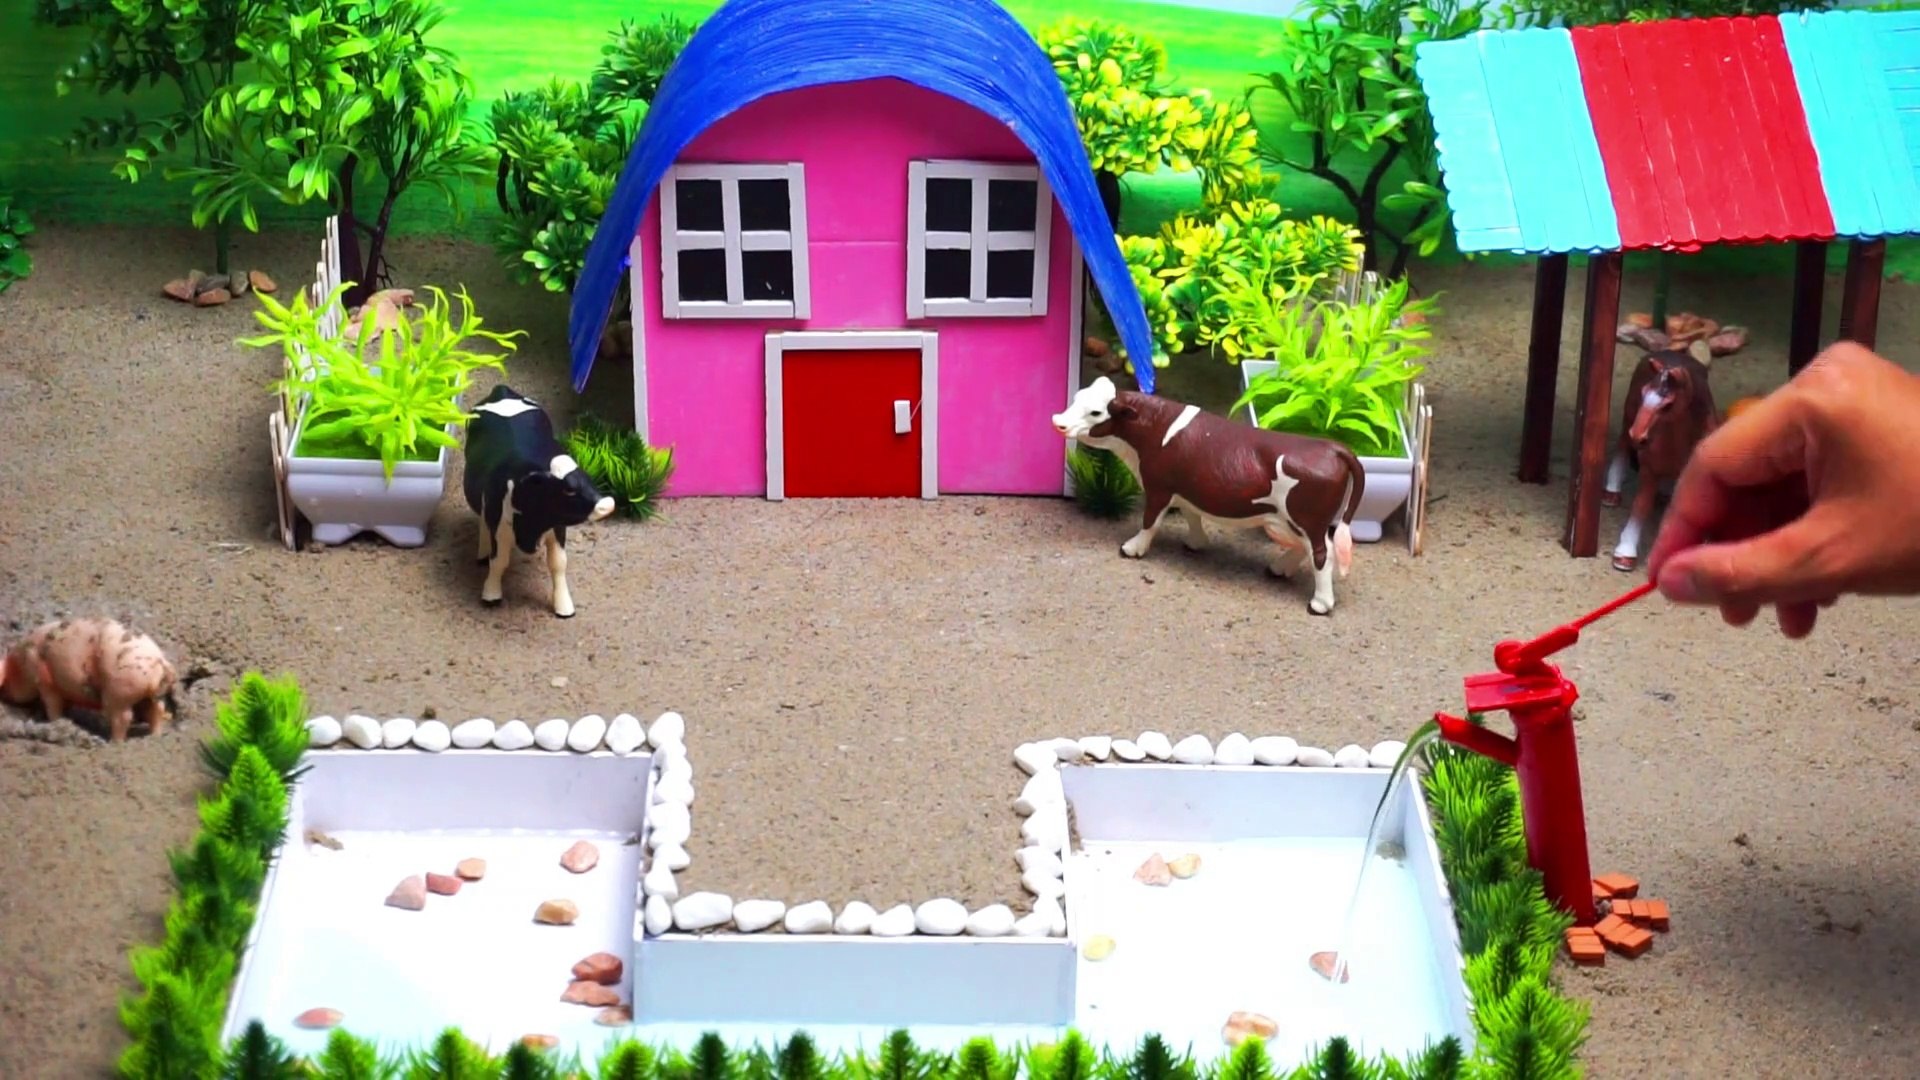 DIY how to make farm diorama with blue lake mini hand pump house of horse  and cow shed - video Dailymotion